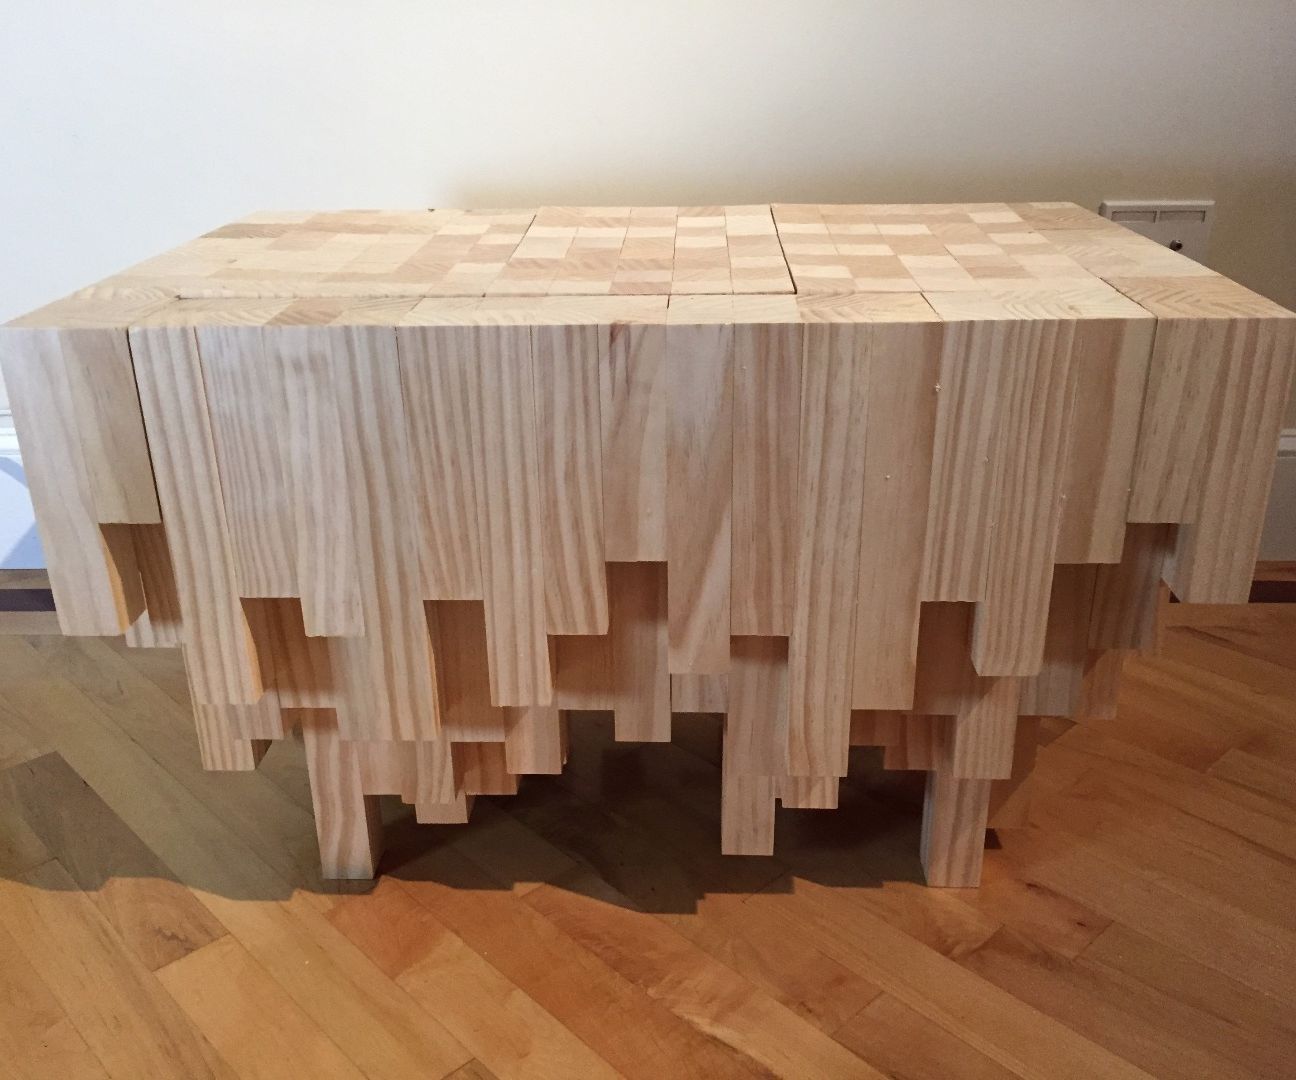 Cascade Coffee Table With Hidden Compartment | Coffee Table Inspiration Intended For Coffee Tables With Hidden Compartments (Gallery 12 of 20)